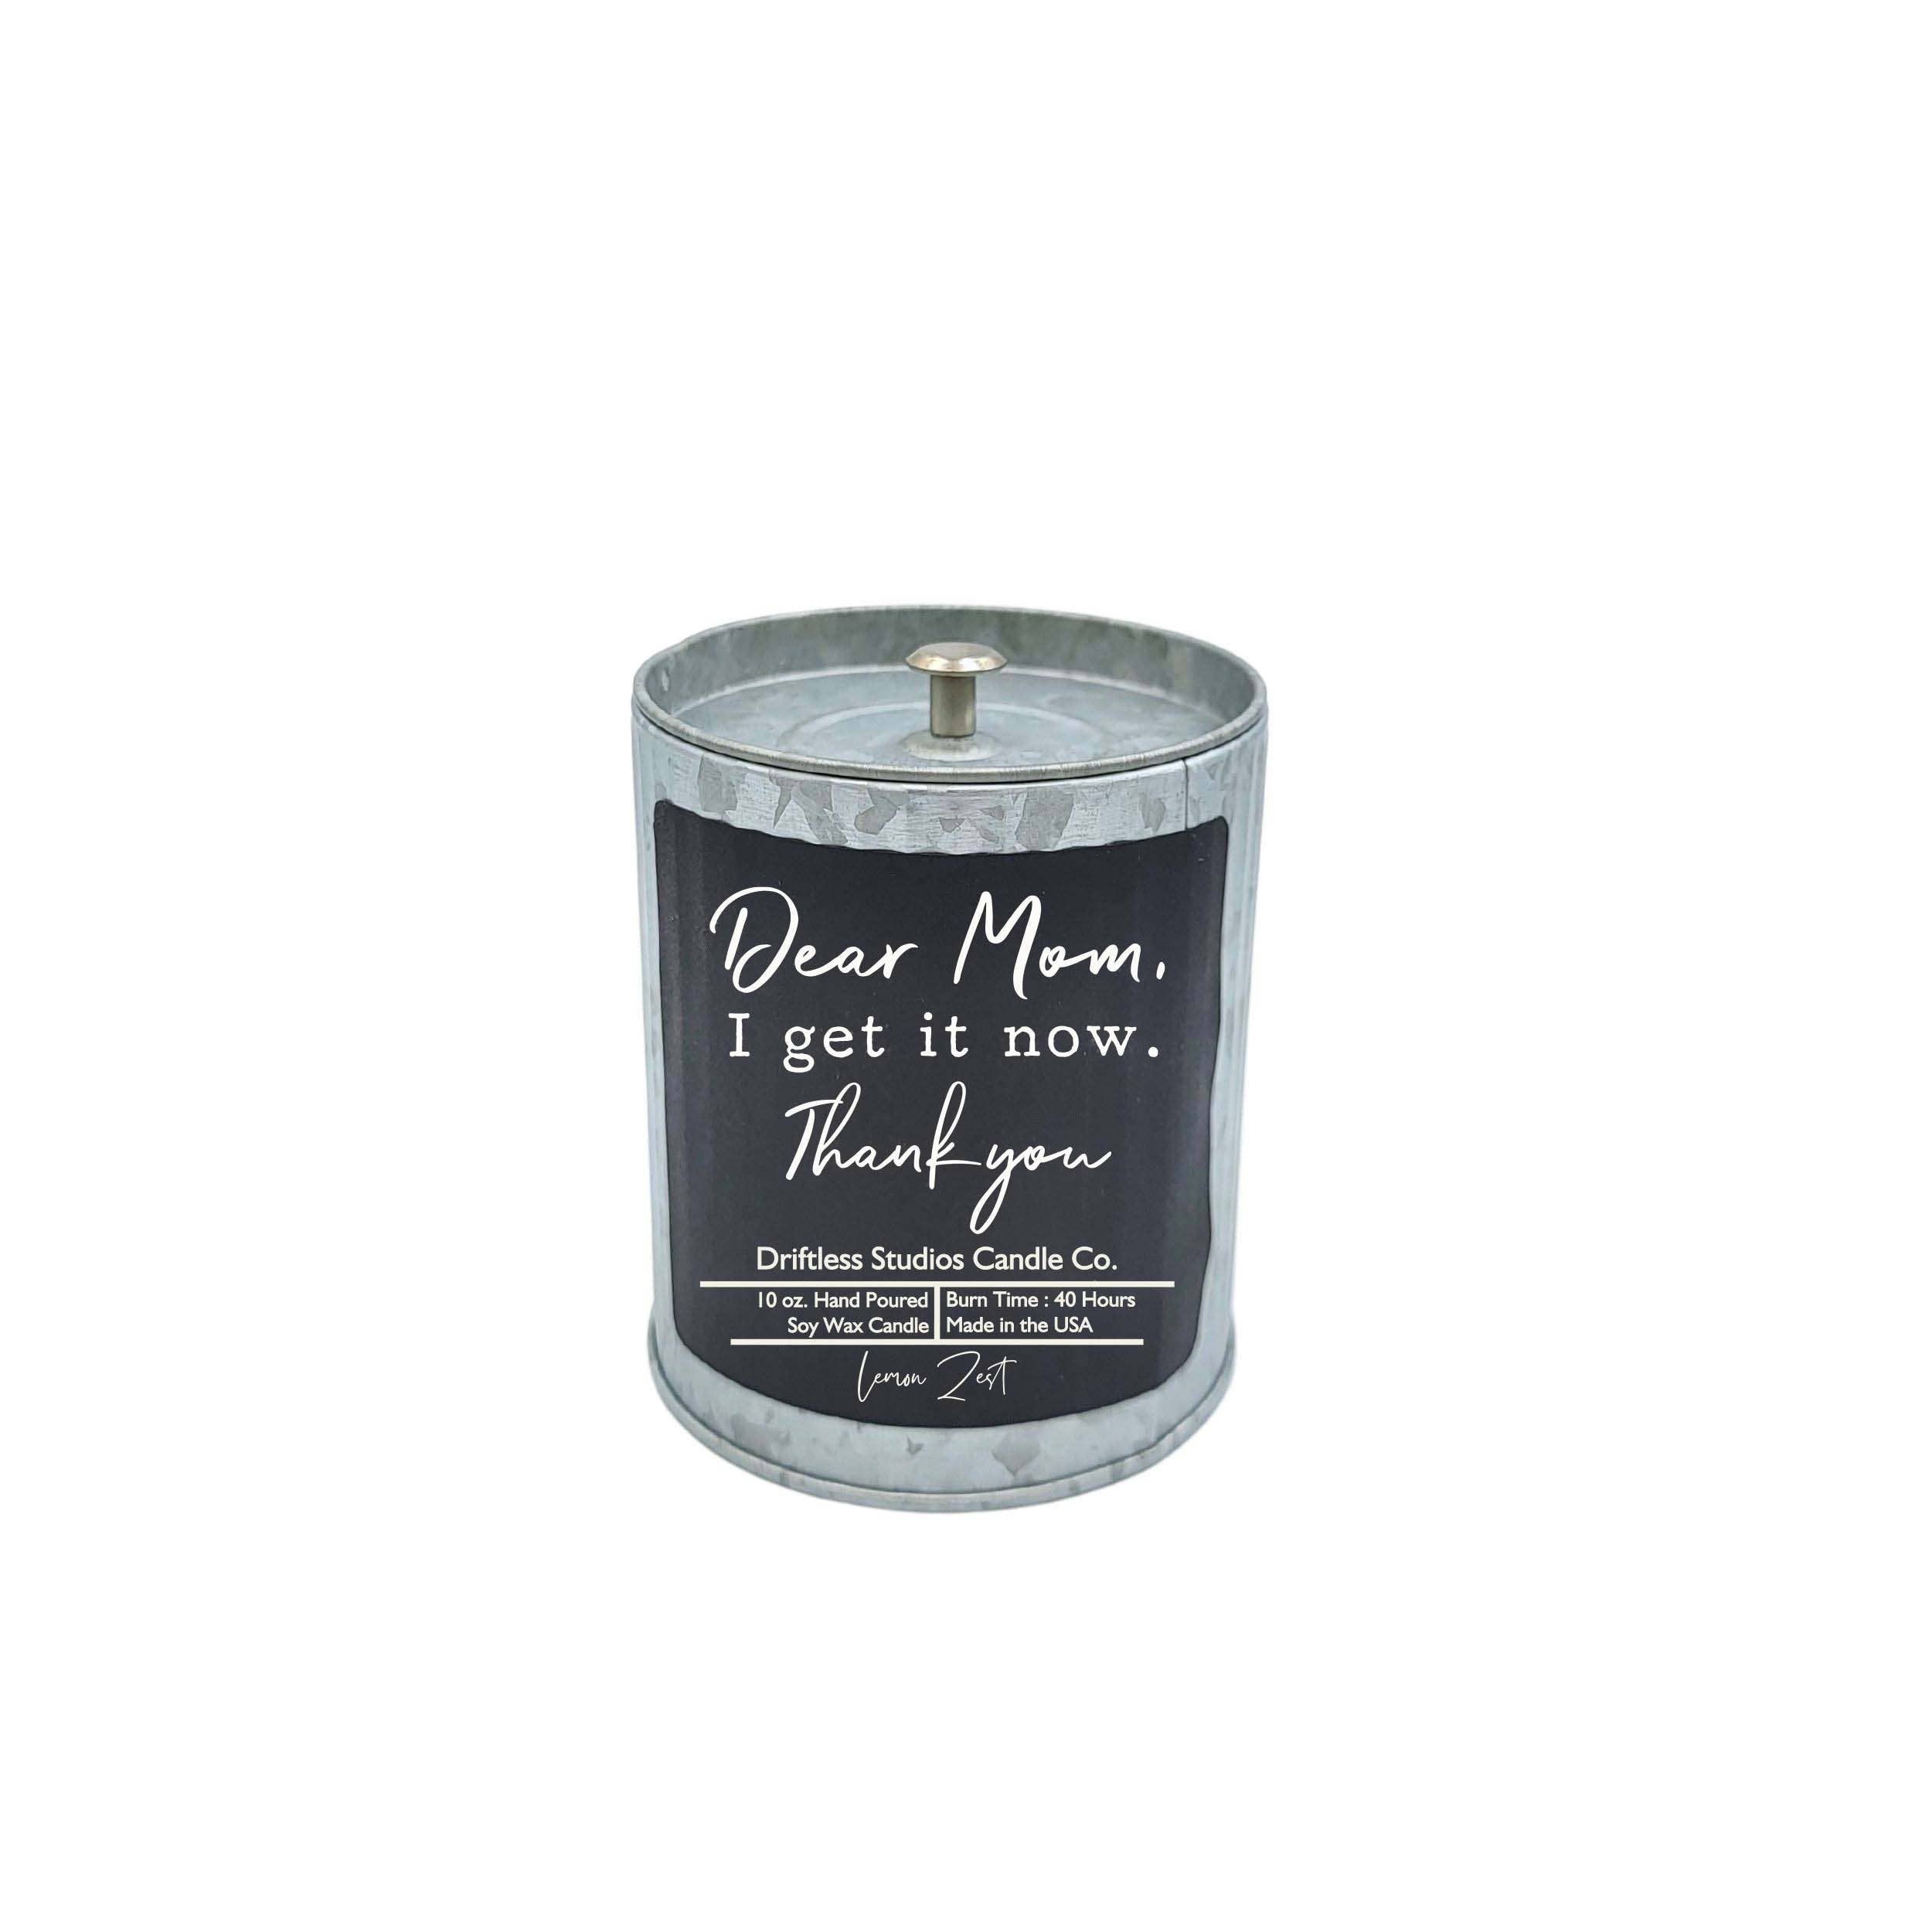 Dear Mom I Get It Now - Mother's Day Candles Soy Wax Candle: Lemon Lavender